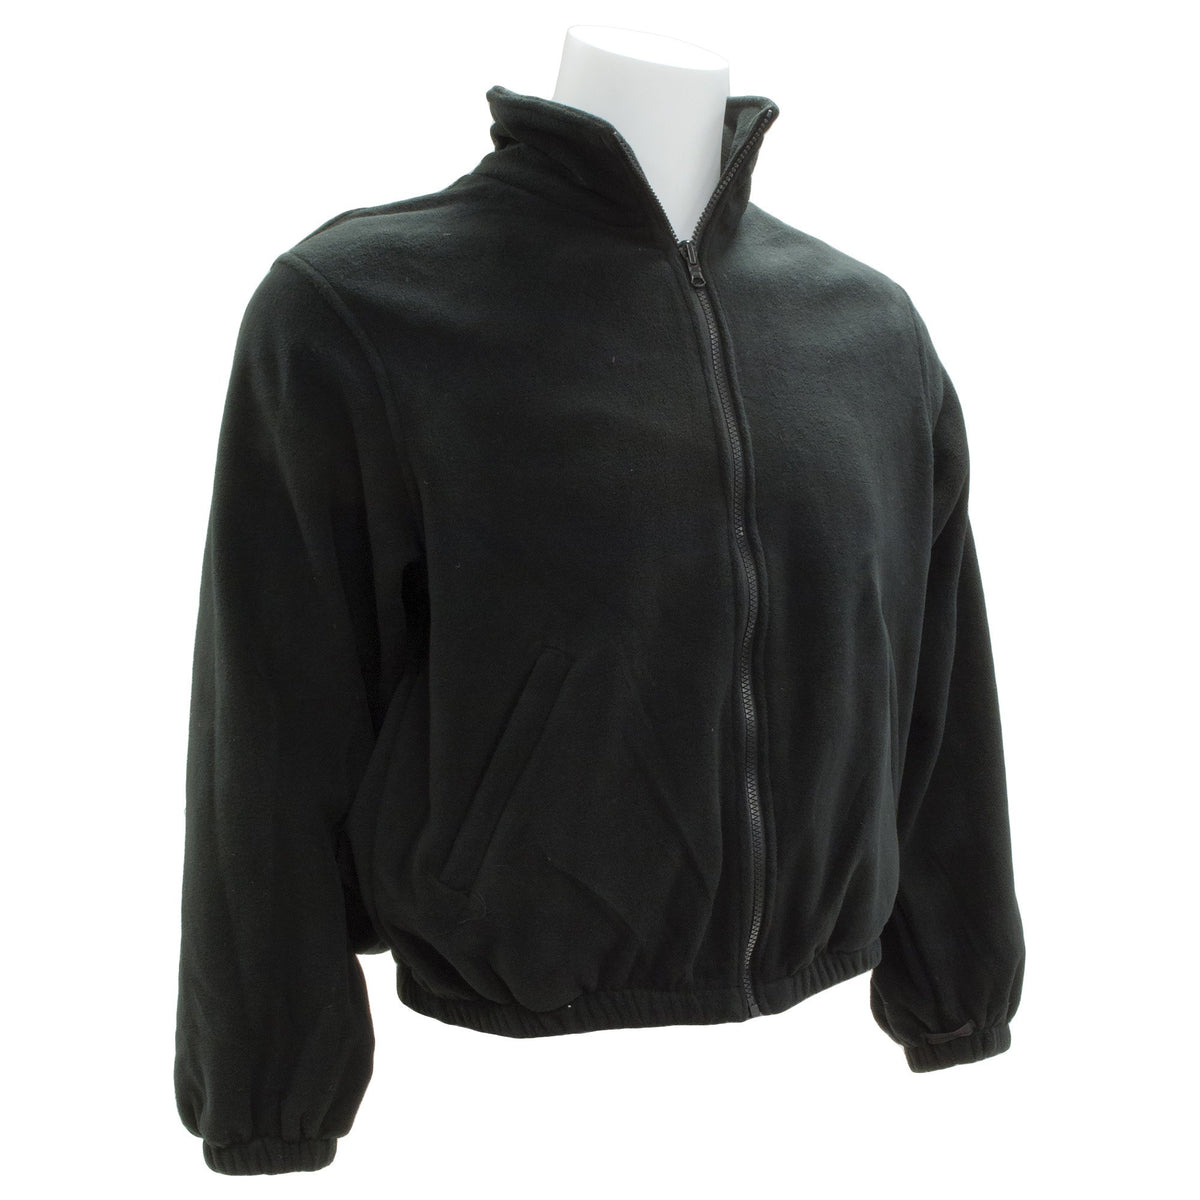 W550 Class 3 3-In-1 Bomber Jacket with Contrasting Trim and Black Bottom